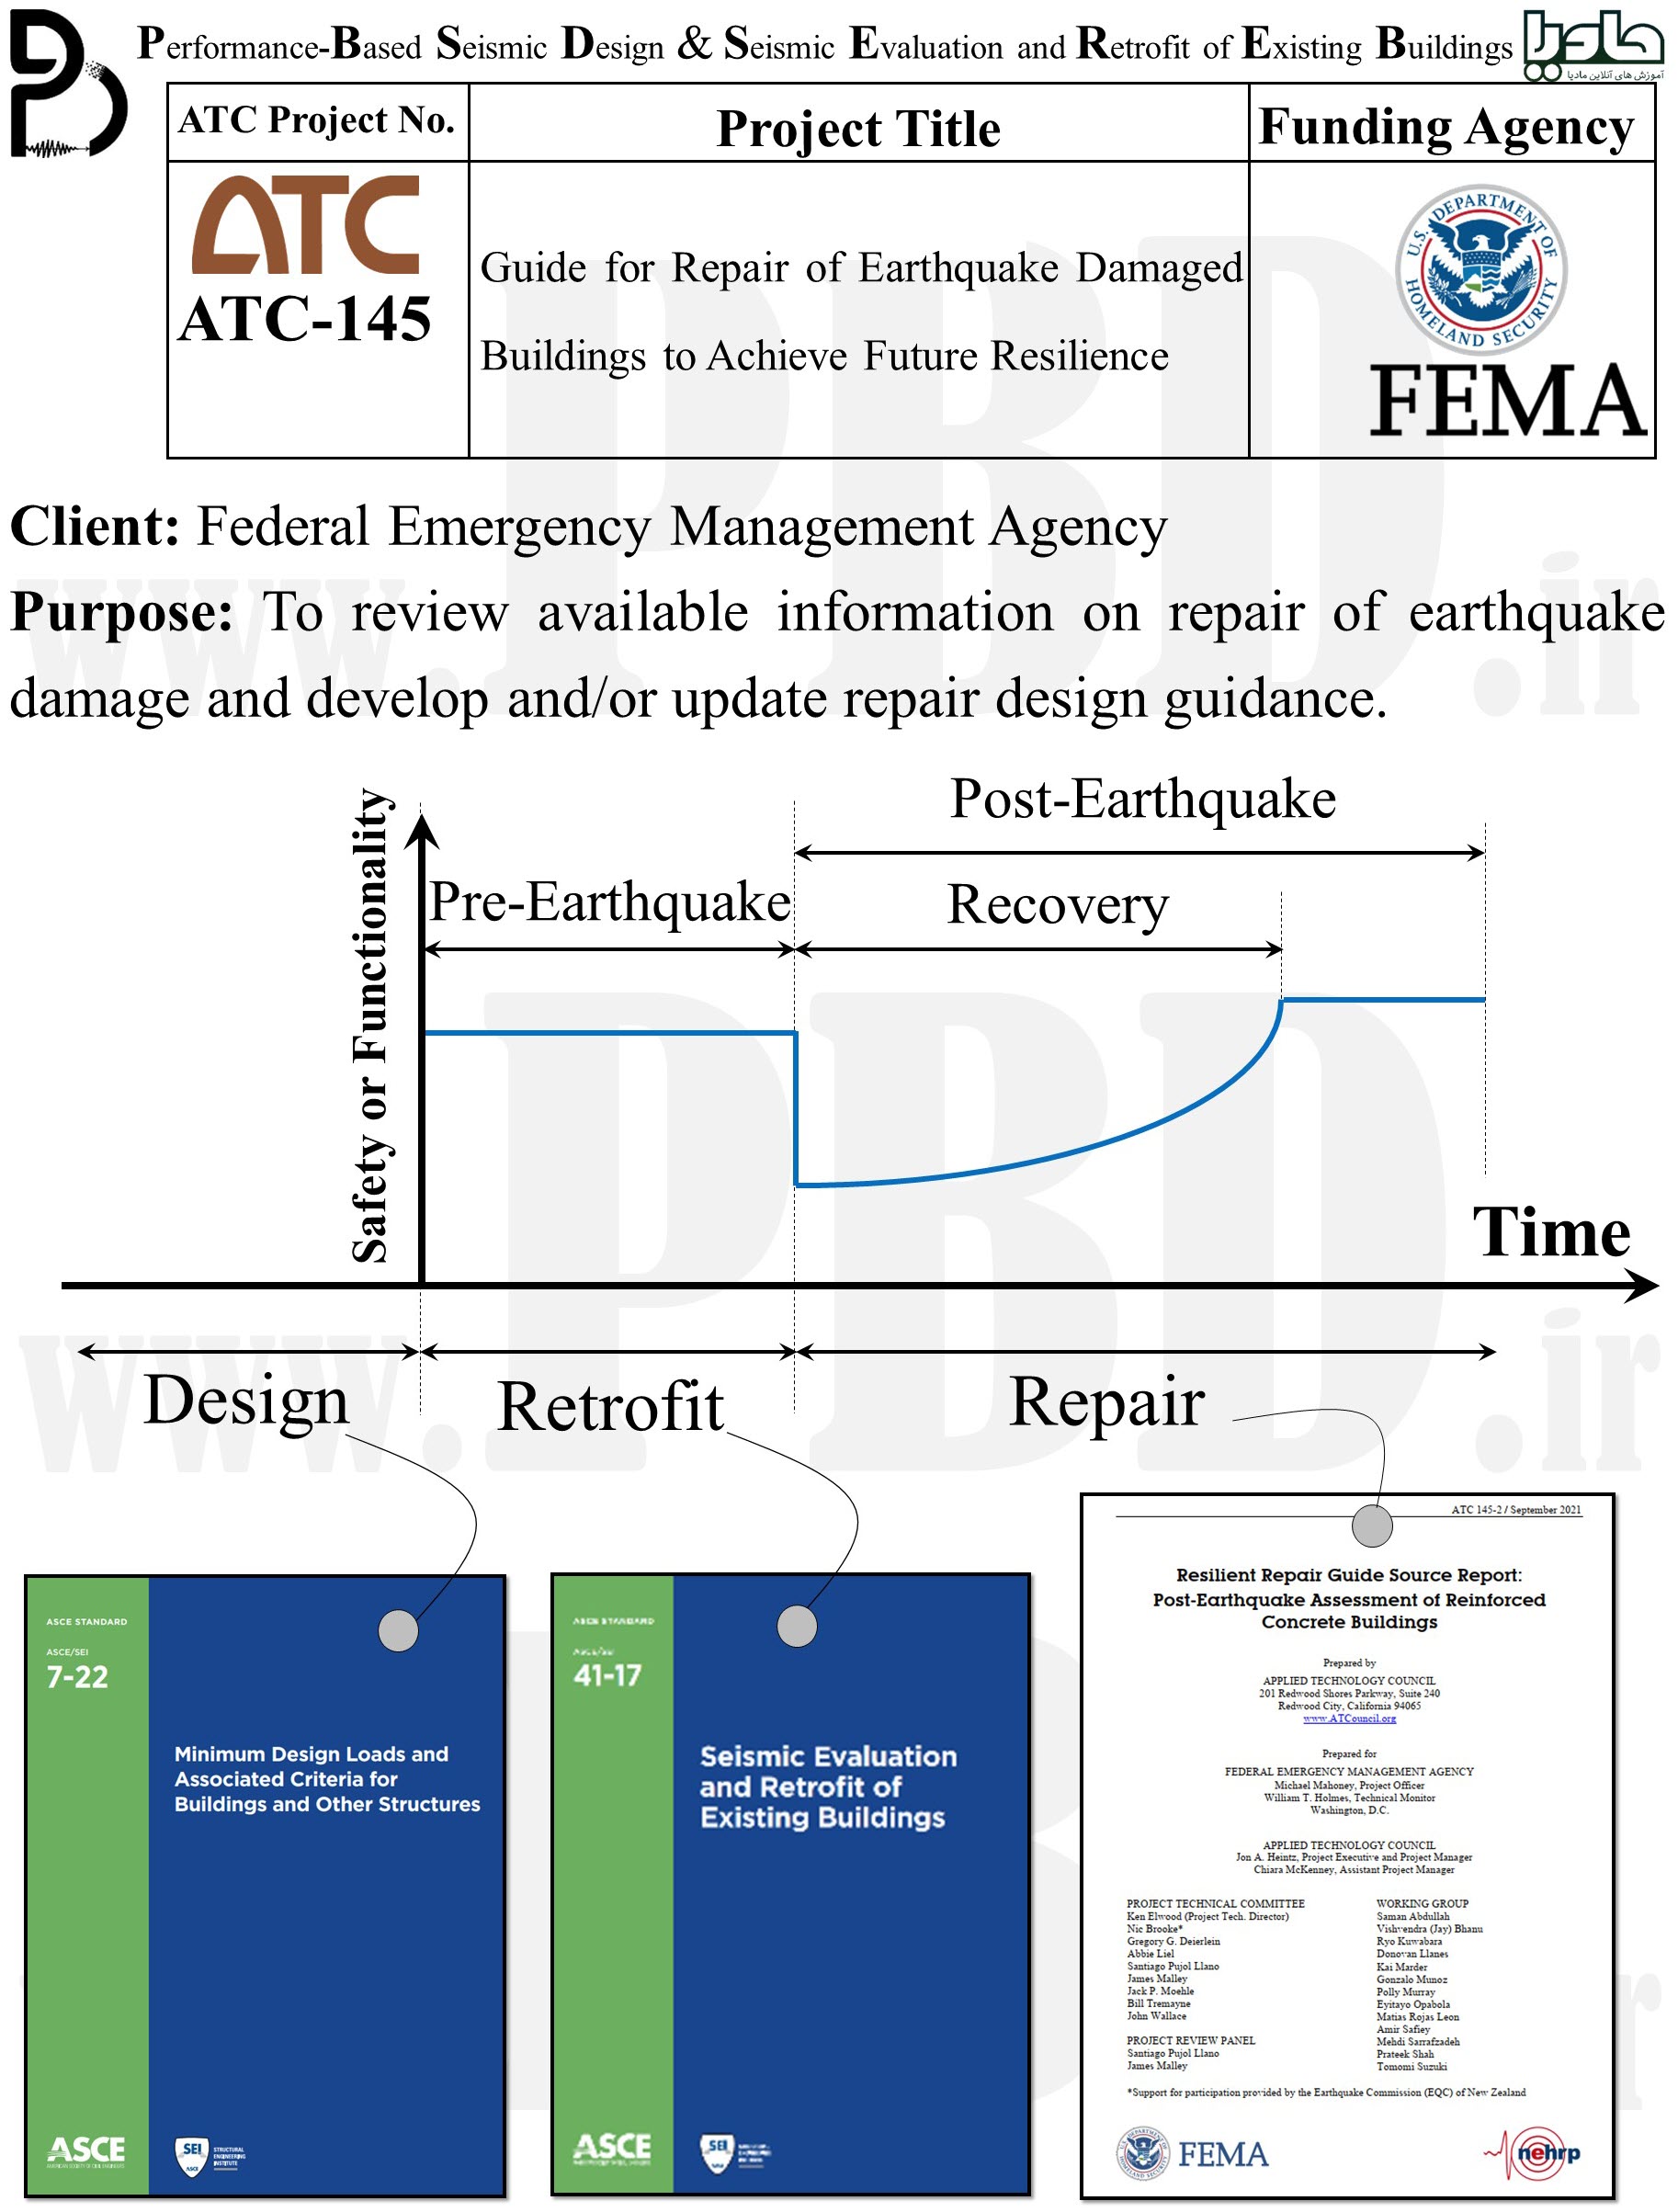 Guide for Repair of Earthquake Damaged Buildings to Achieve Future Resilience